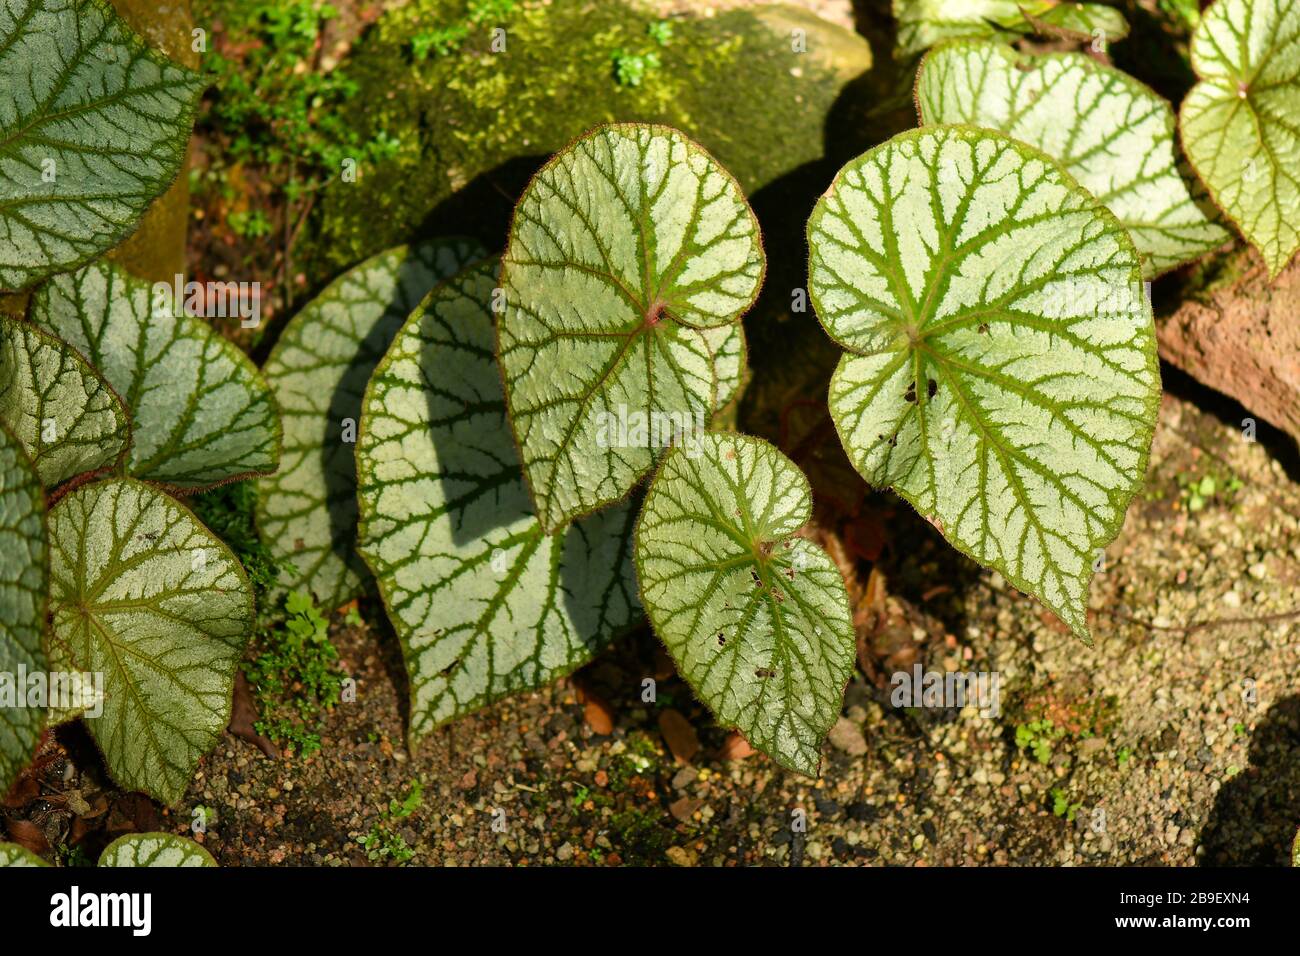 Begonias tropical and subtropical Asia plant Stock Photo